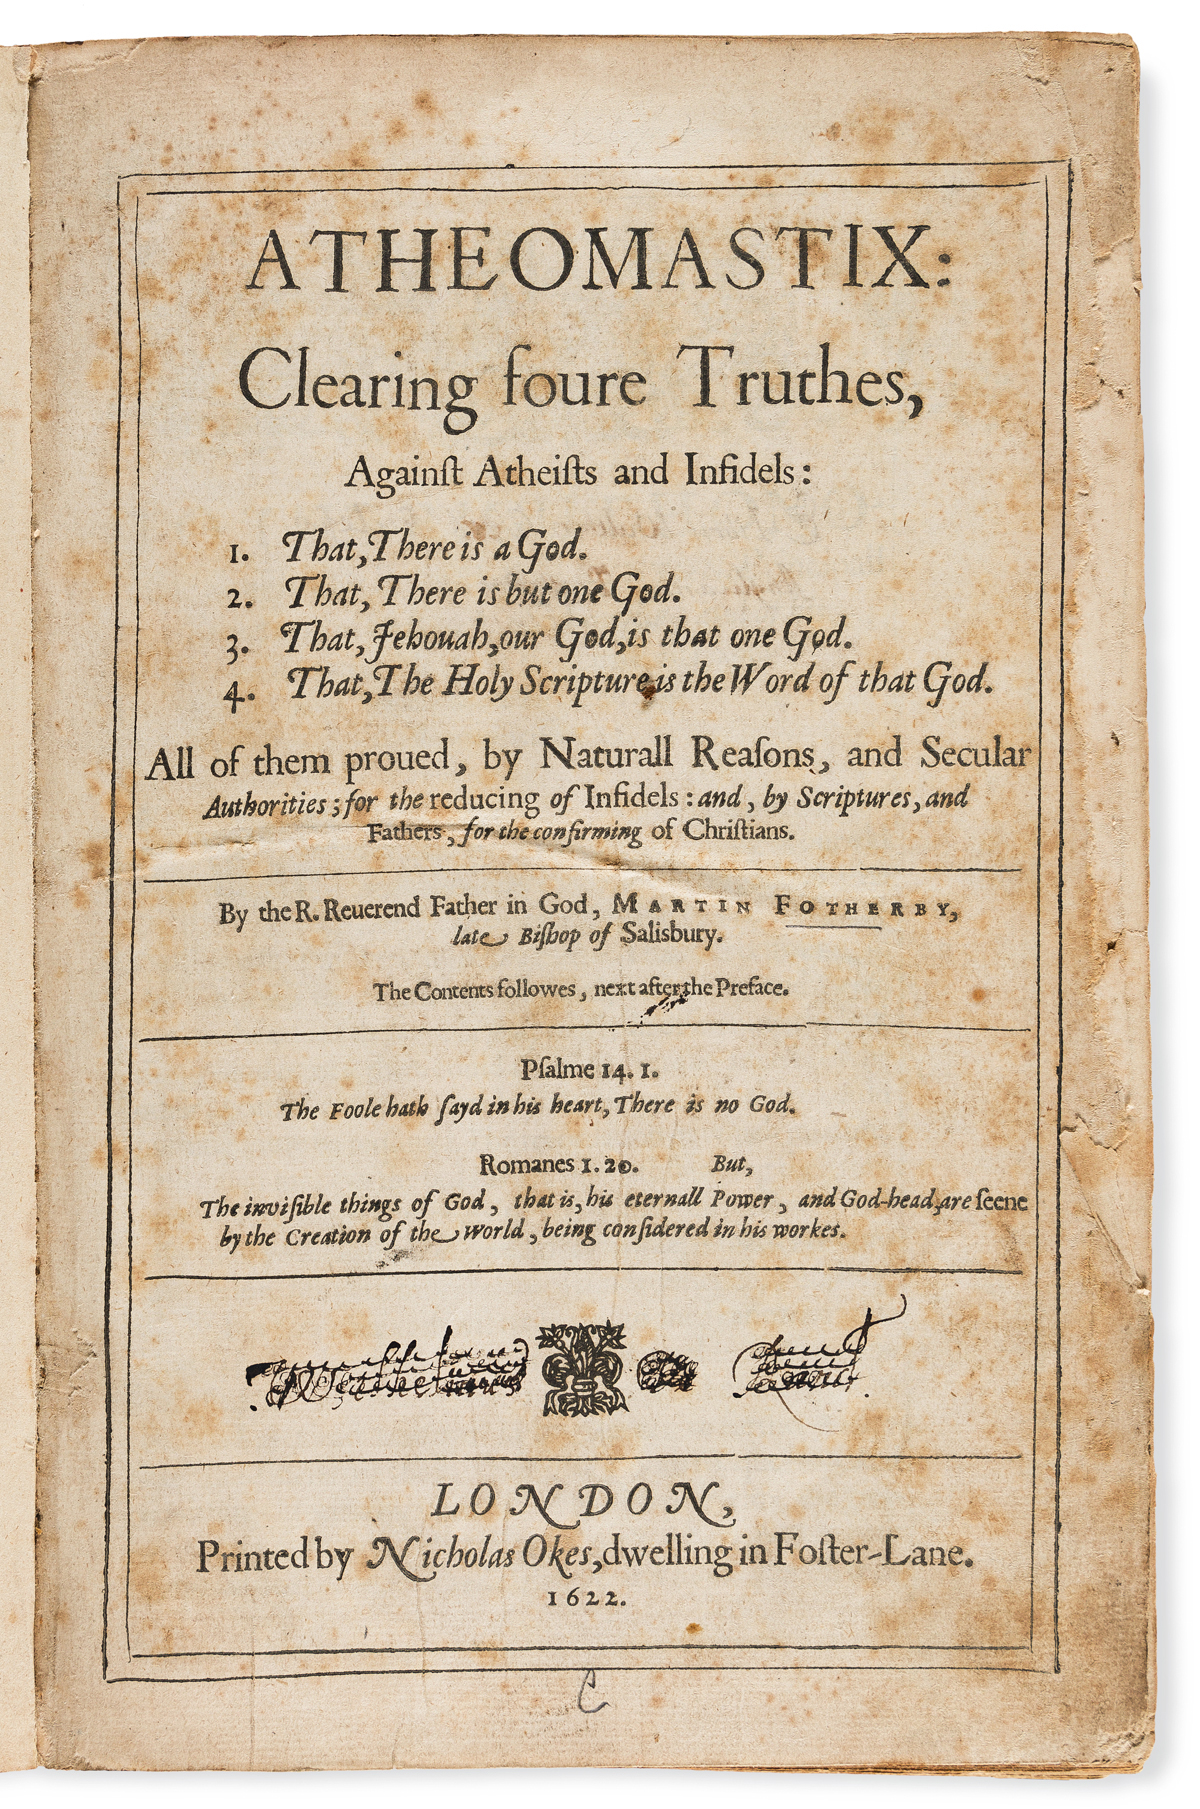 Fotherby, Martin (1549/1550-1620) Atheomastix: Clearing Foure Truthes, against Atheists and Infidels.